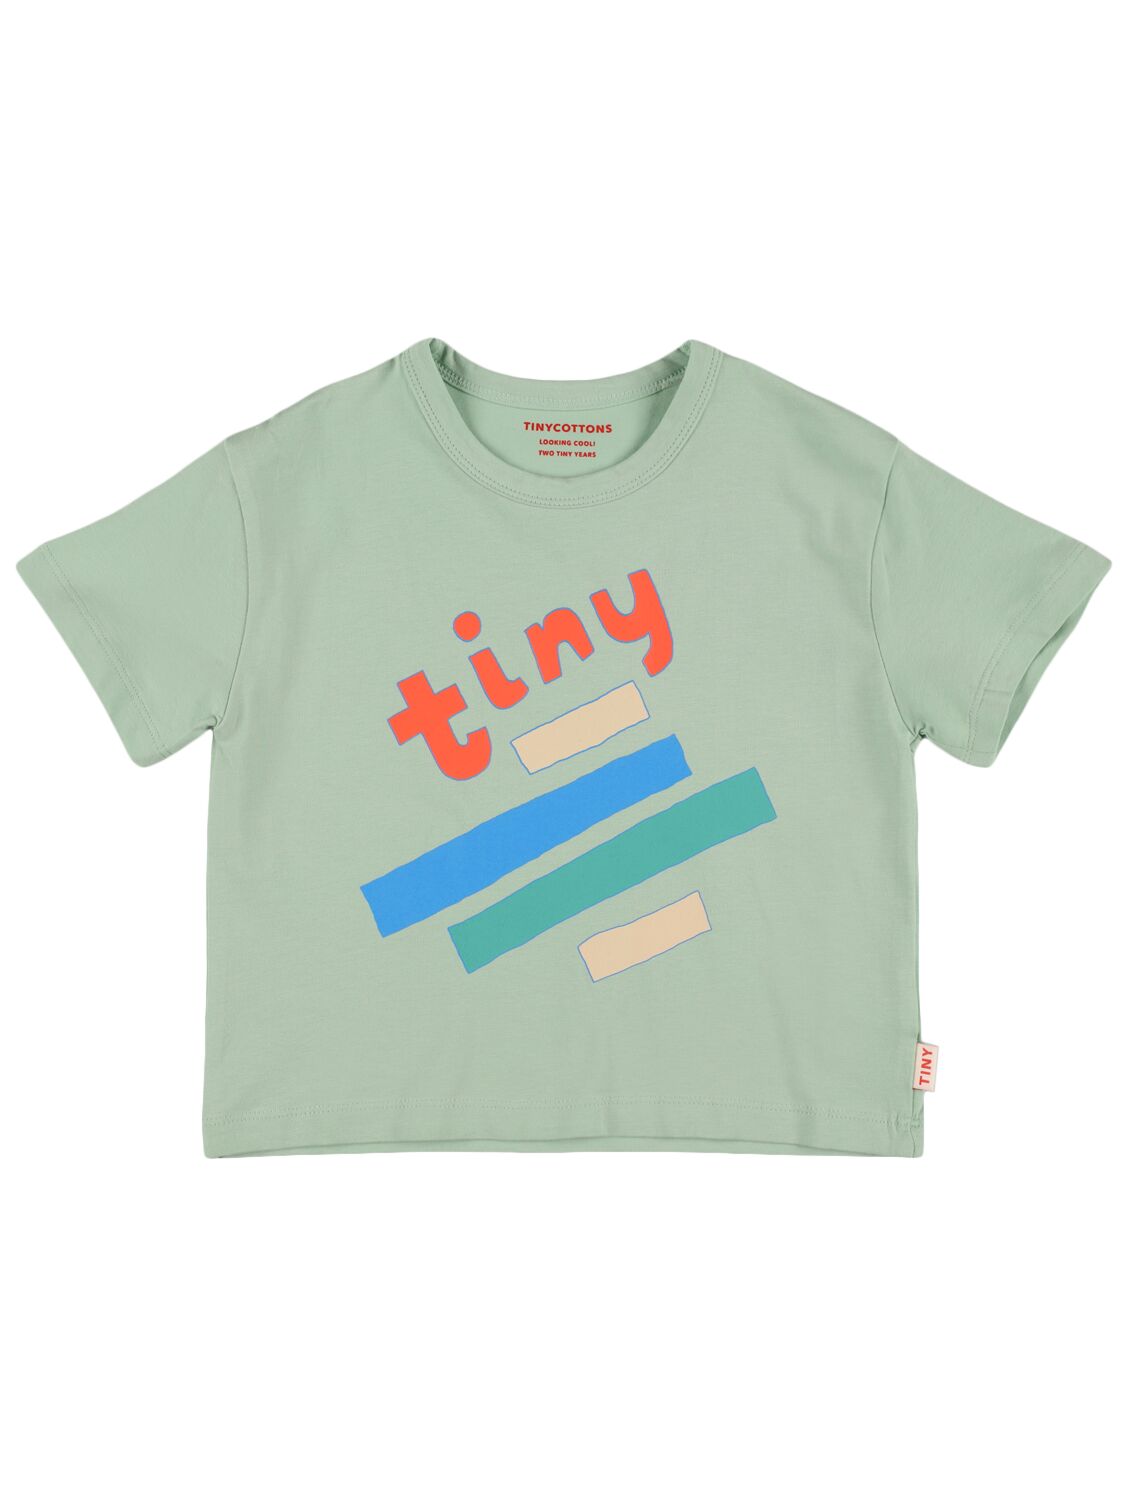 Tiny Cottons Kids' Printed Organic Cotton T-shirt In Green